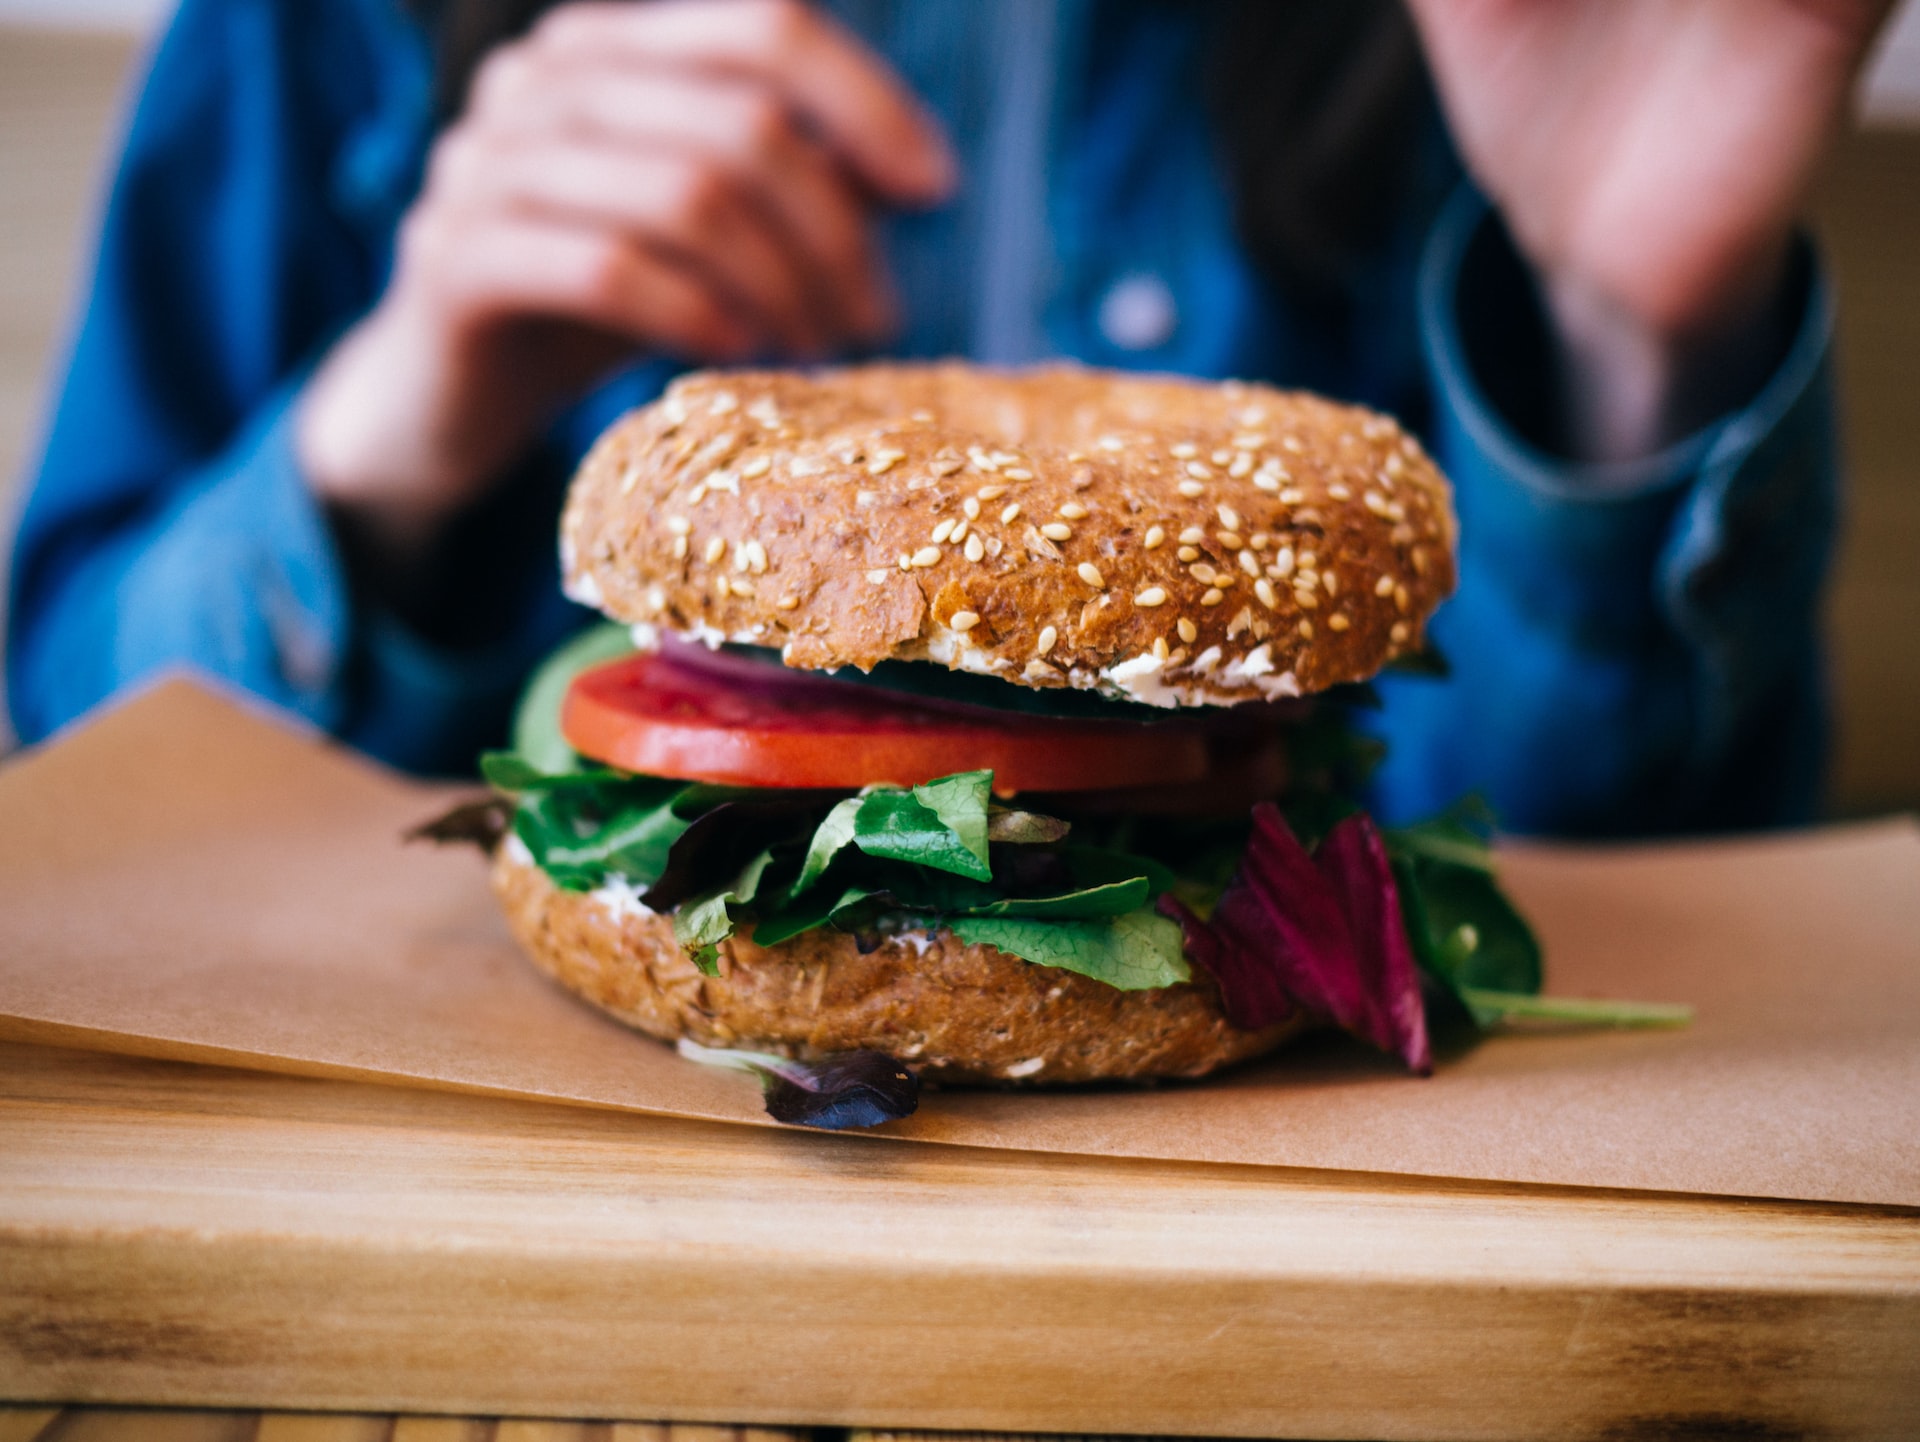 vegan fast food chains in the US